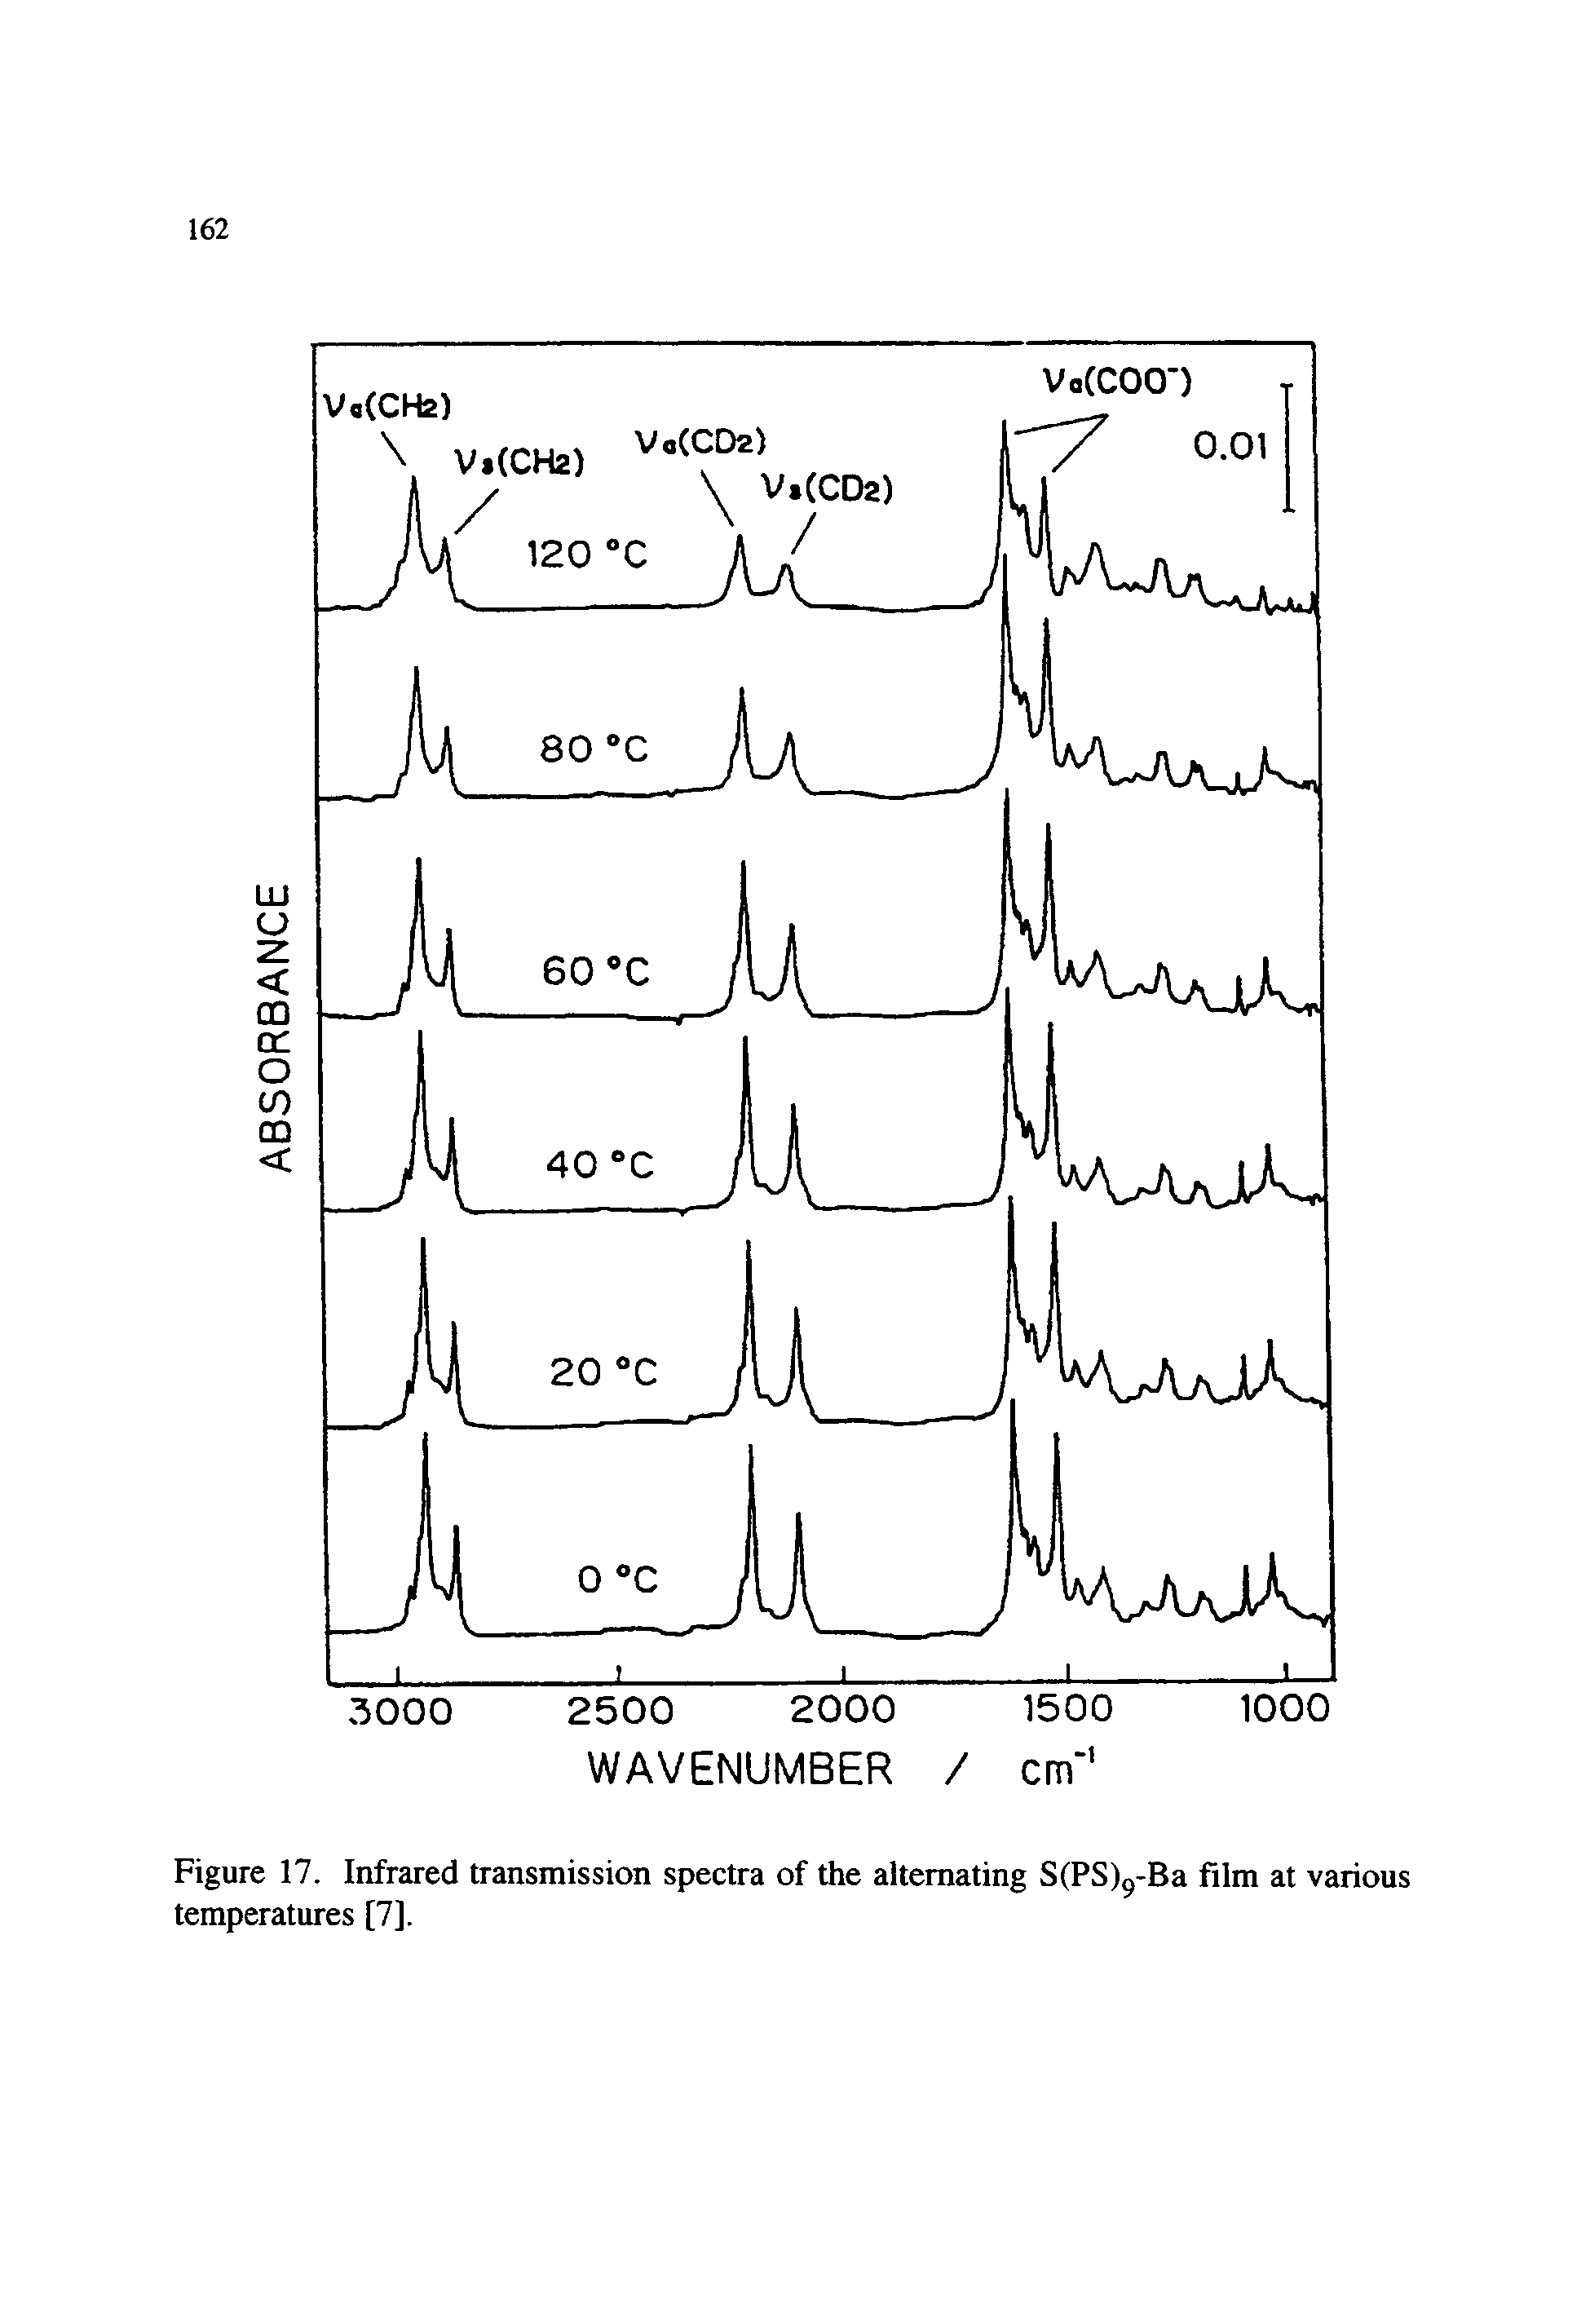 Figure 17. Infrared transmission spectra of the alternating S(PS)9-Ba film at various temperatures [7].